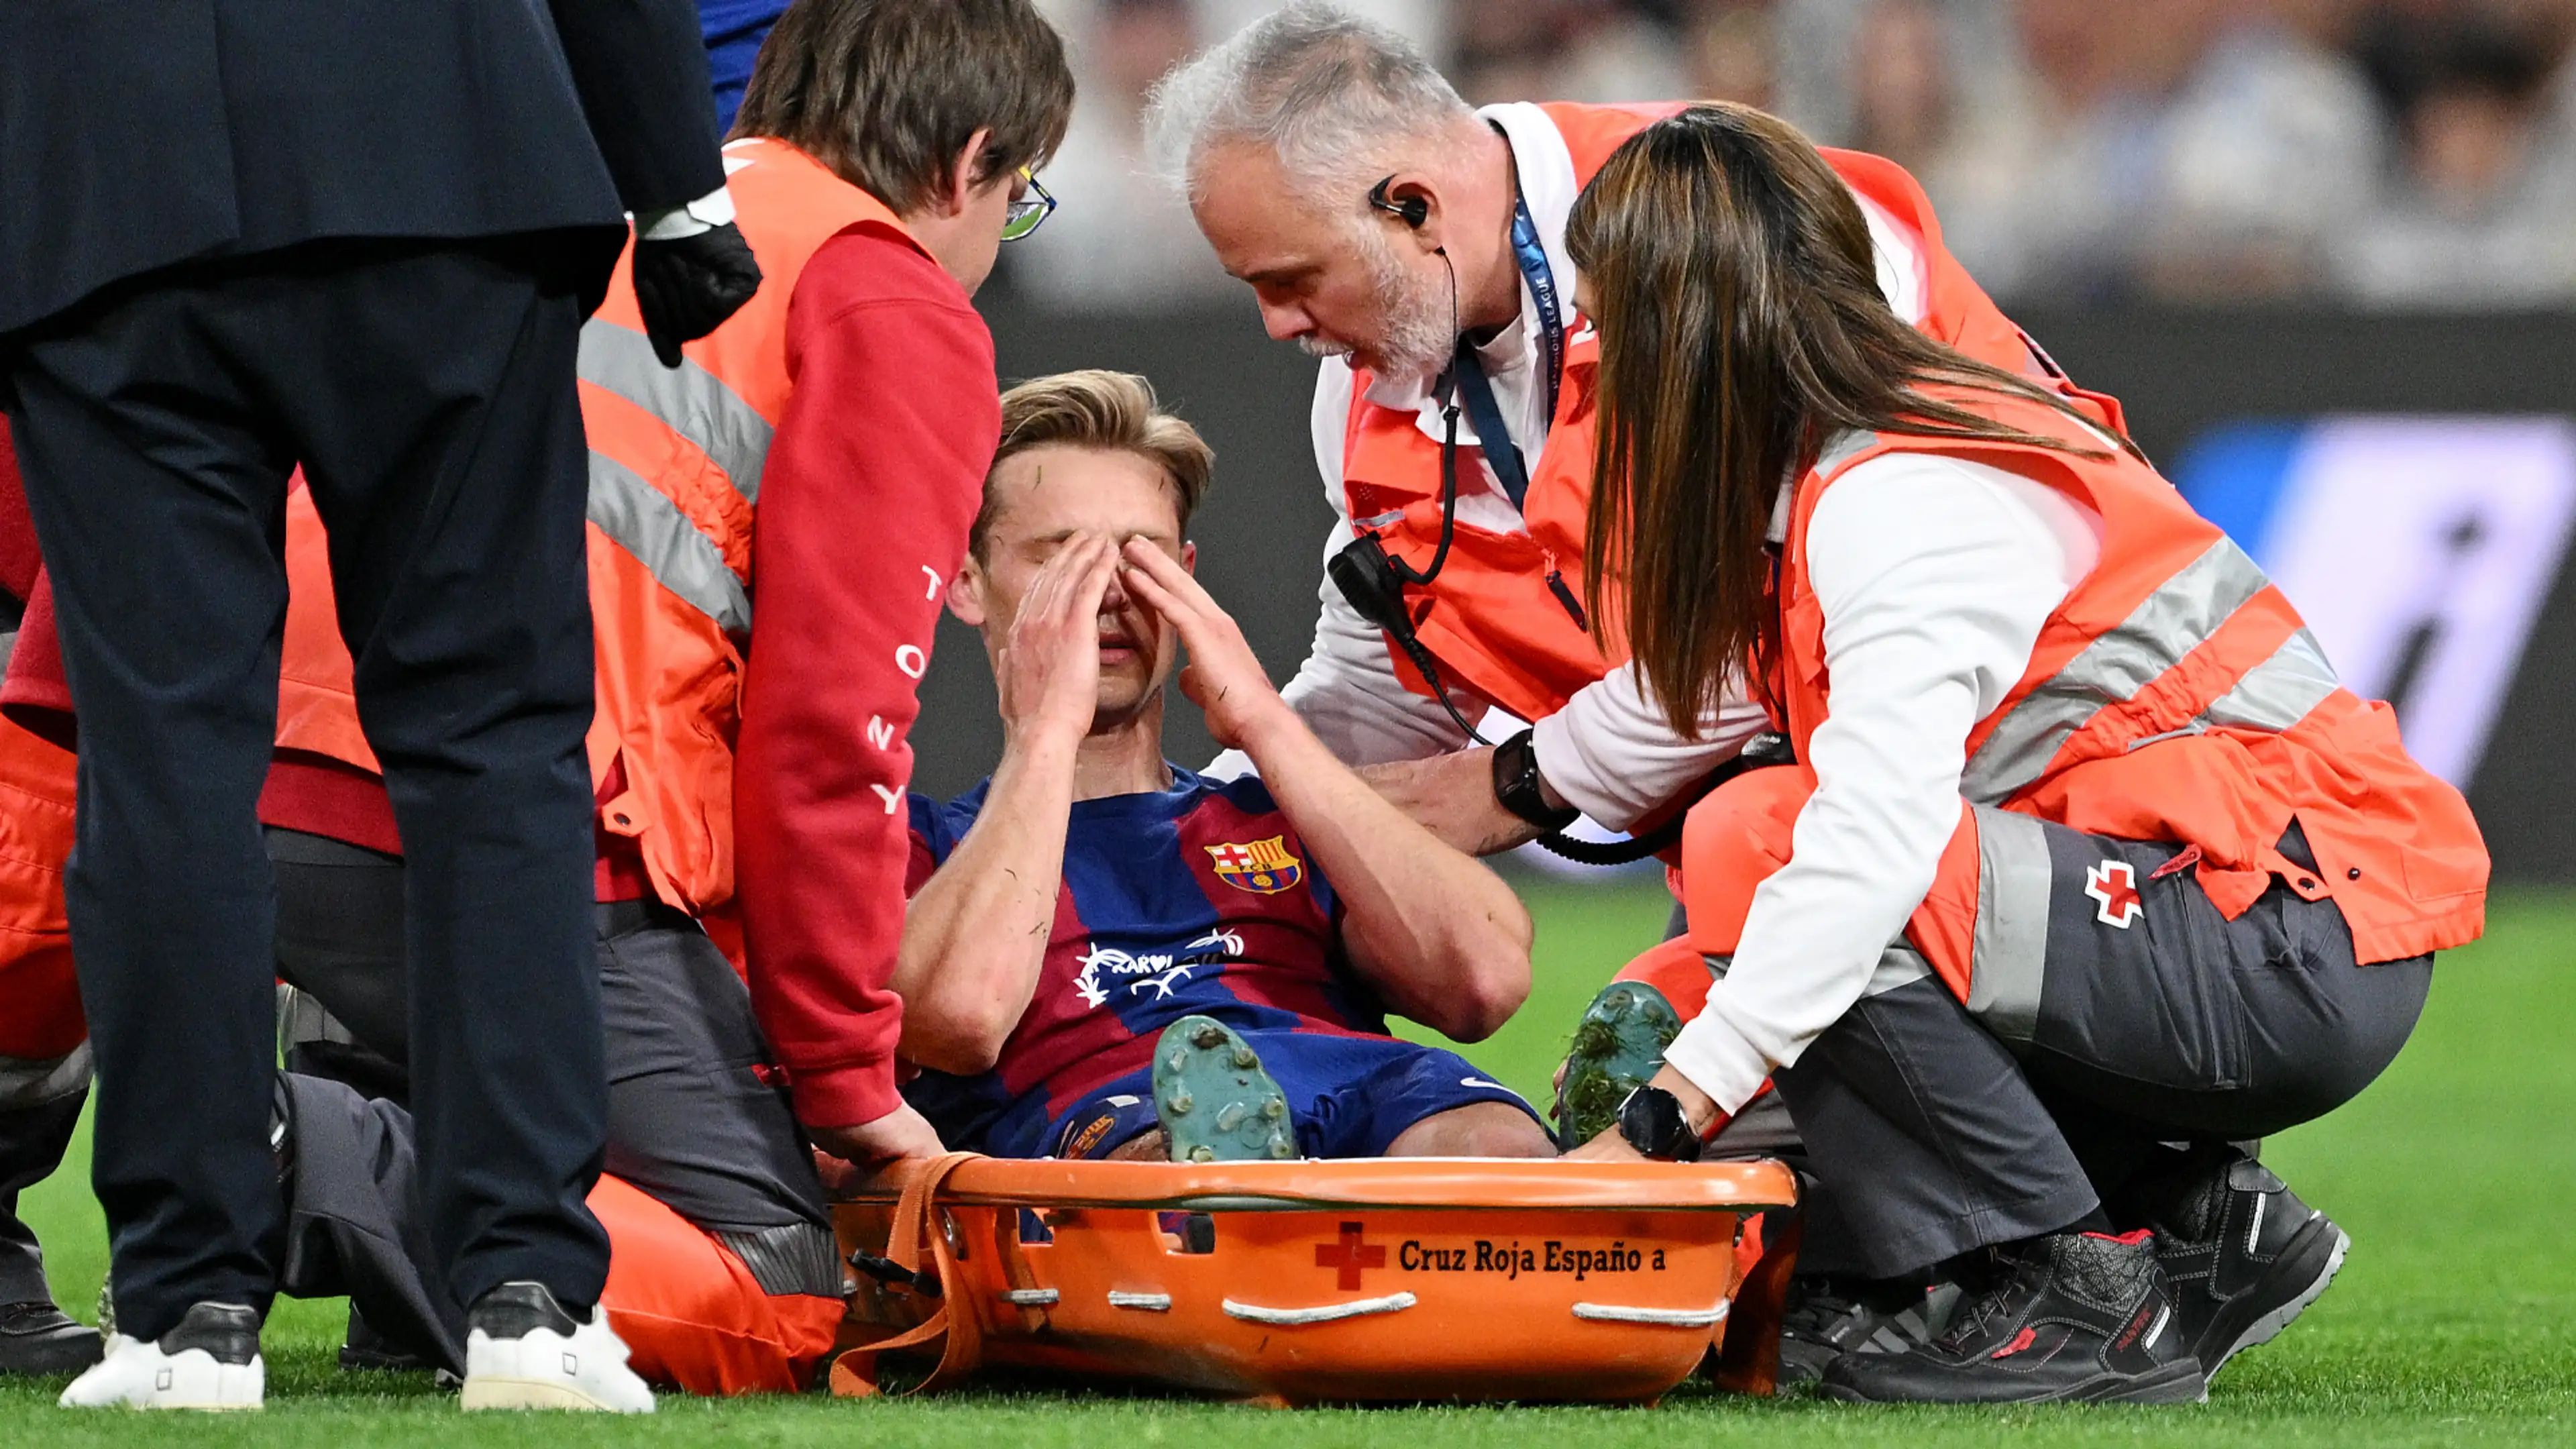 Barcelona star out for remainder of season after El Clasico injury